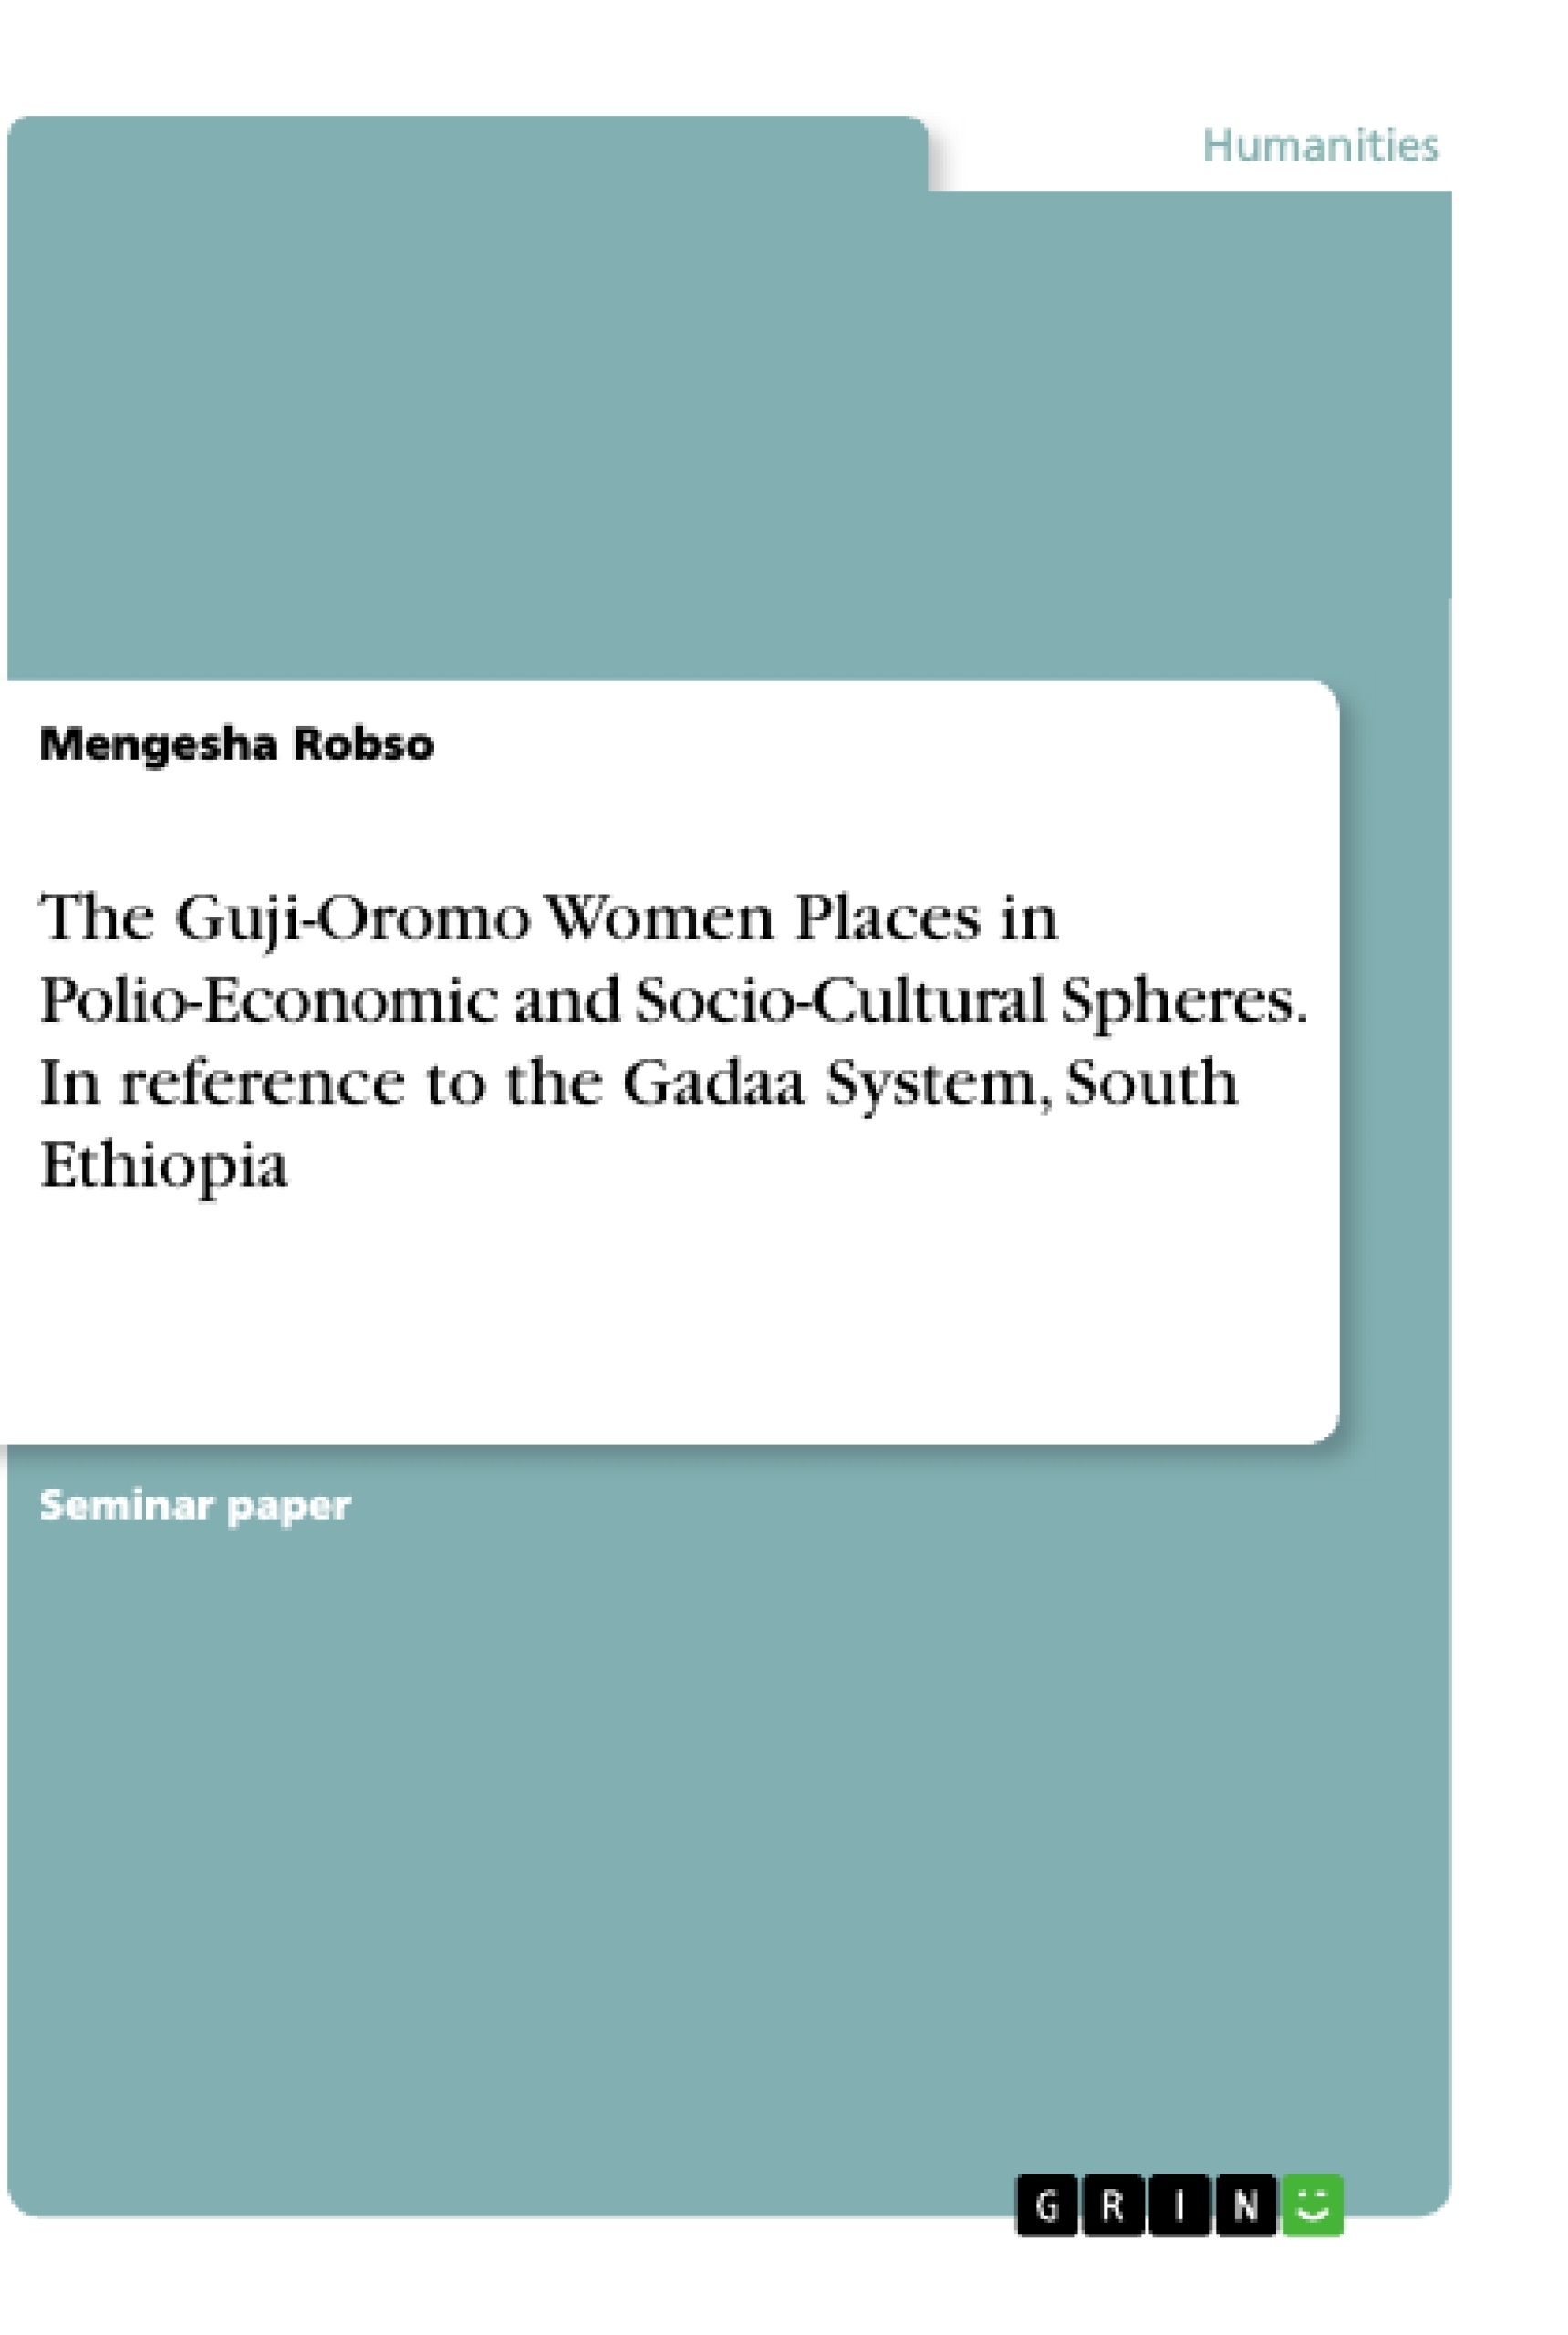 Título: The Guji-Oromo Women Places in Polio-Economic and Socio-Cultural Spheres. In reference to the Gadaa System, South Ethiopia